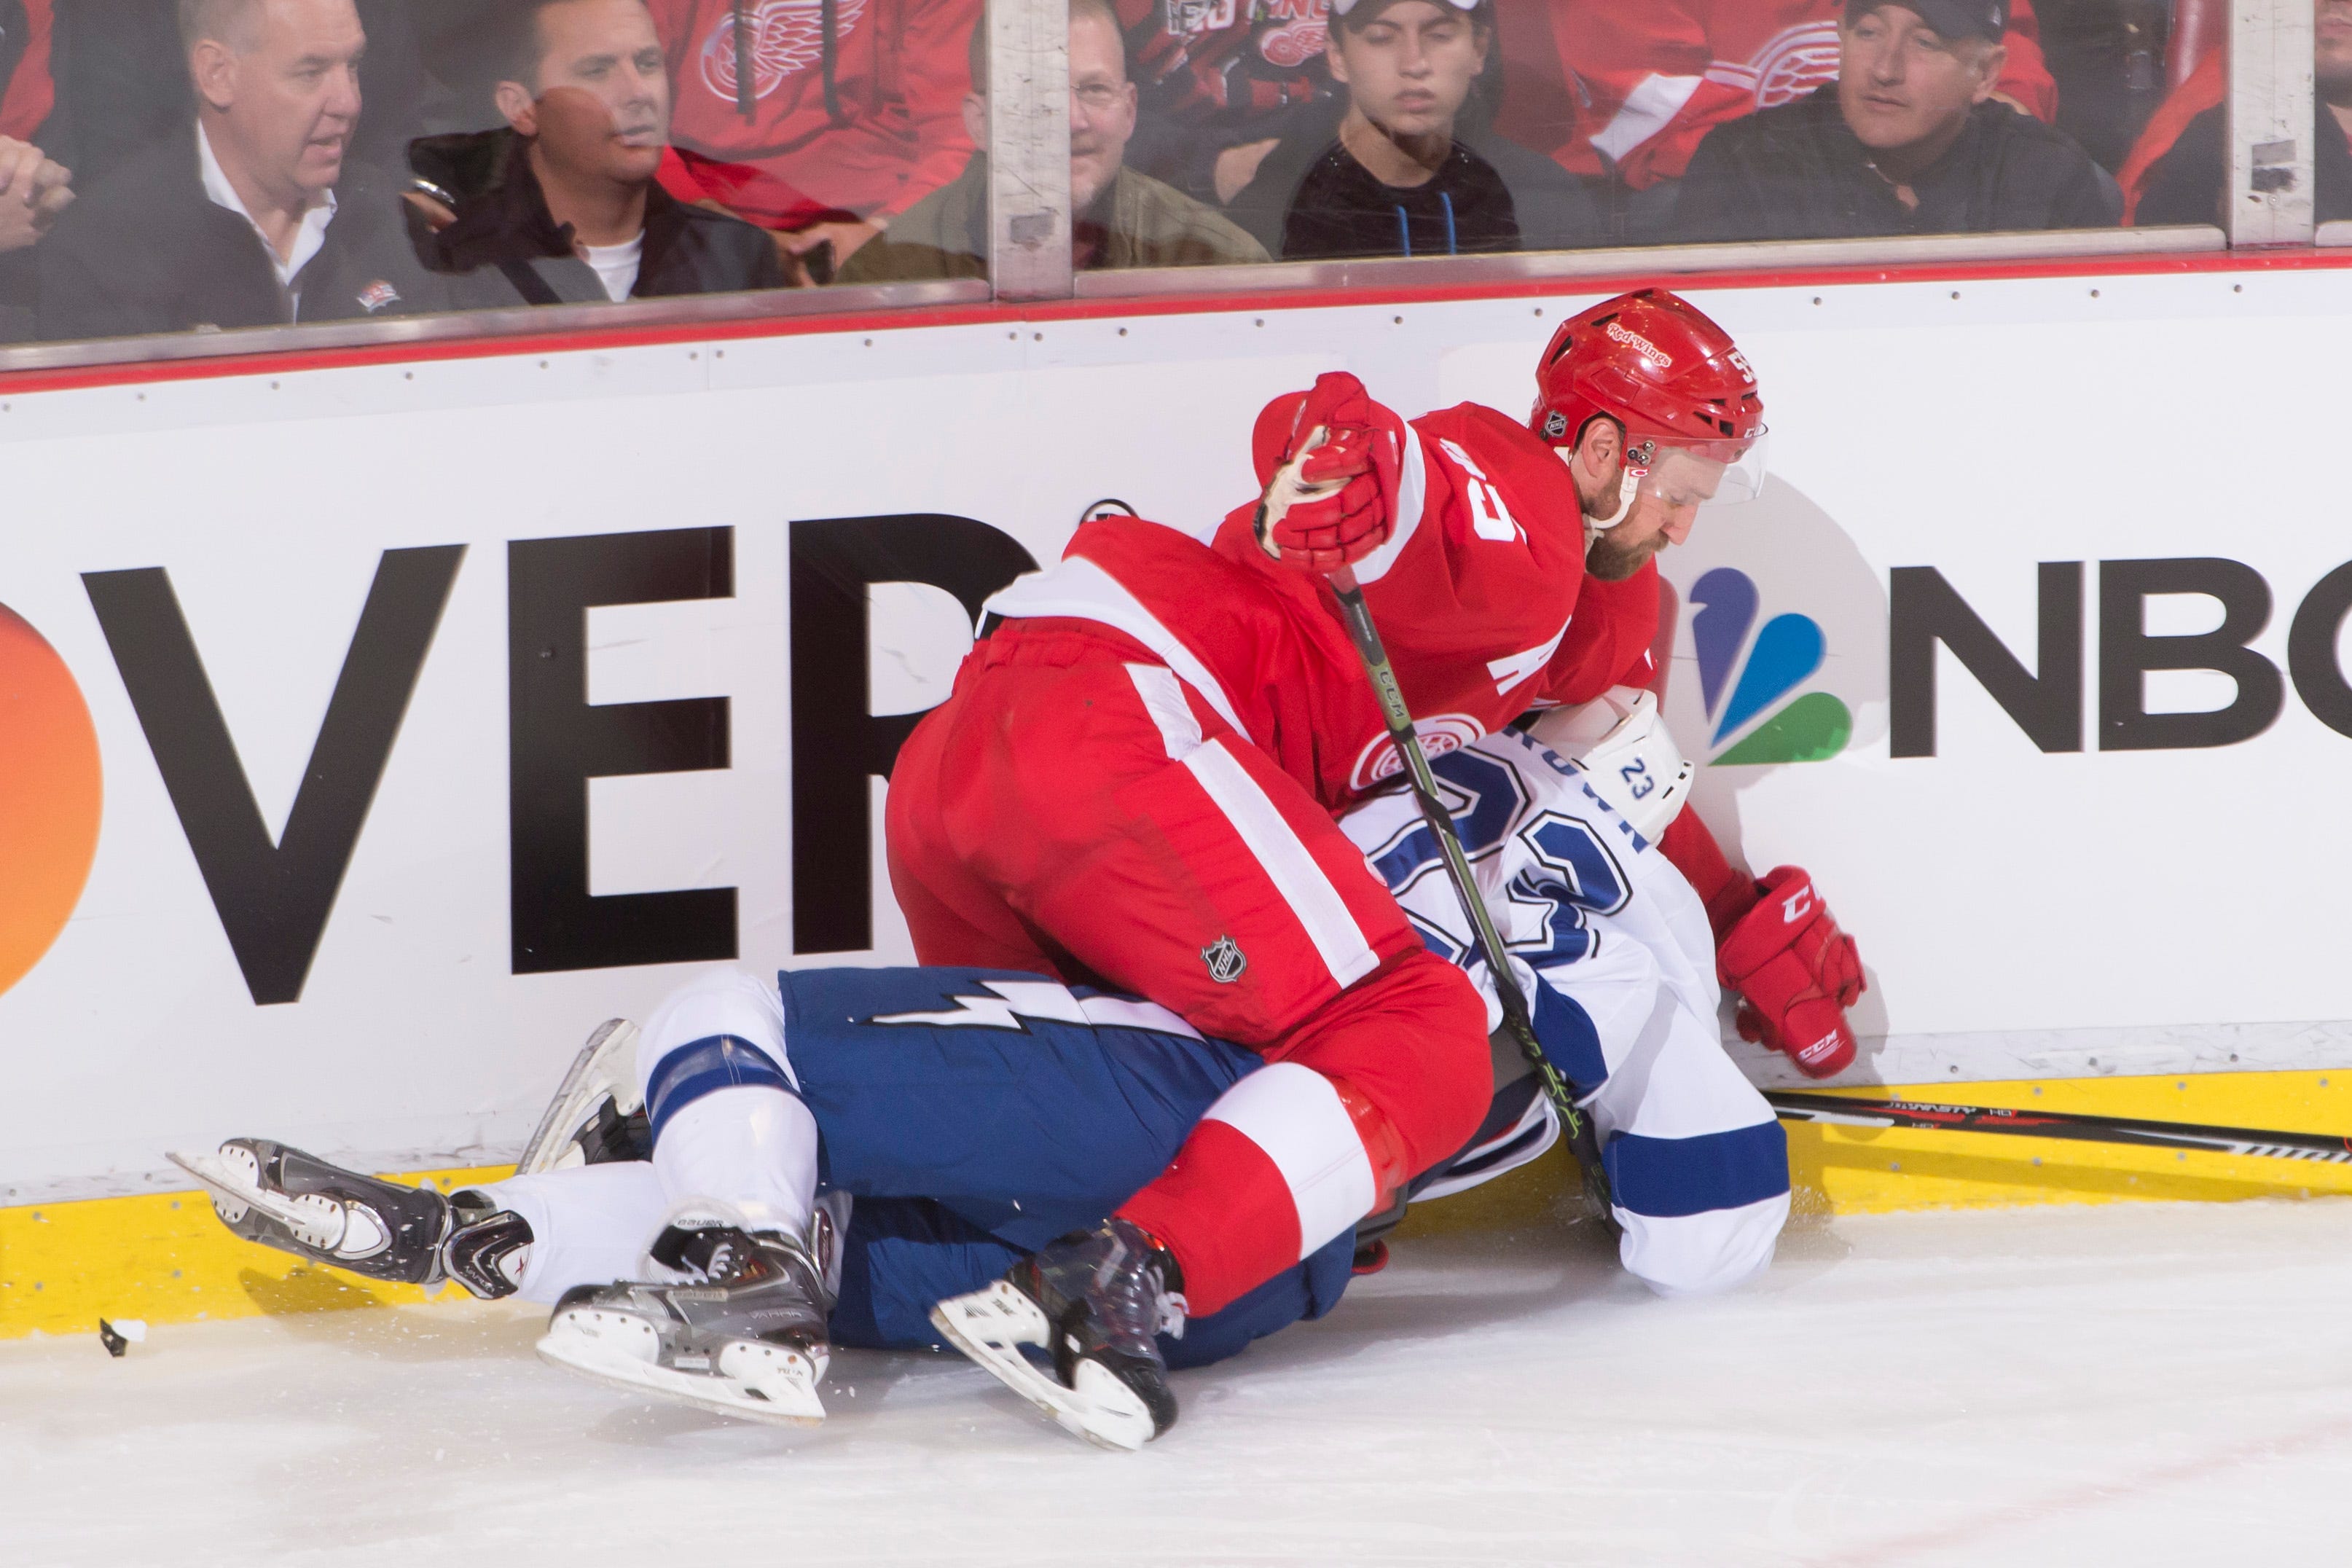 Detroit defenseman Niklas Kronwall buries Tampa Bay right wing J.T. Brown with a check during a game at Joe Louis Arena in Detroit on Oct. 13 , 2015.